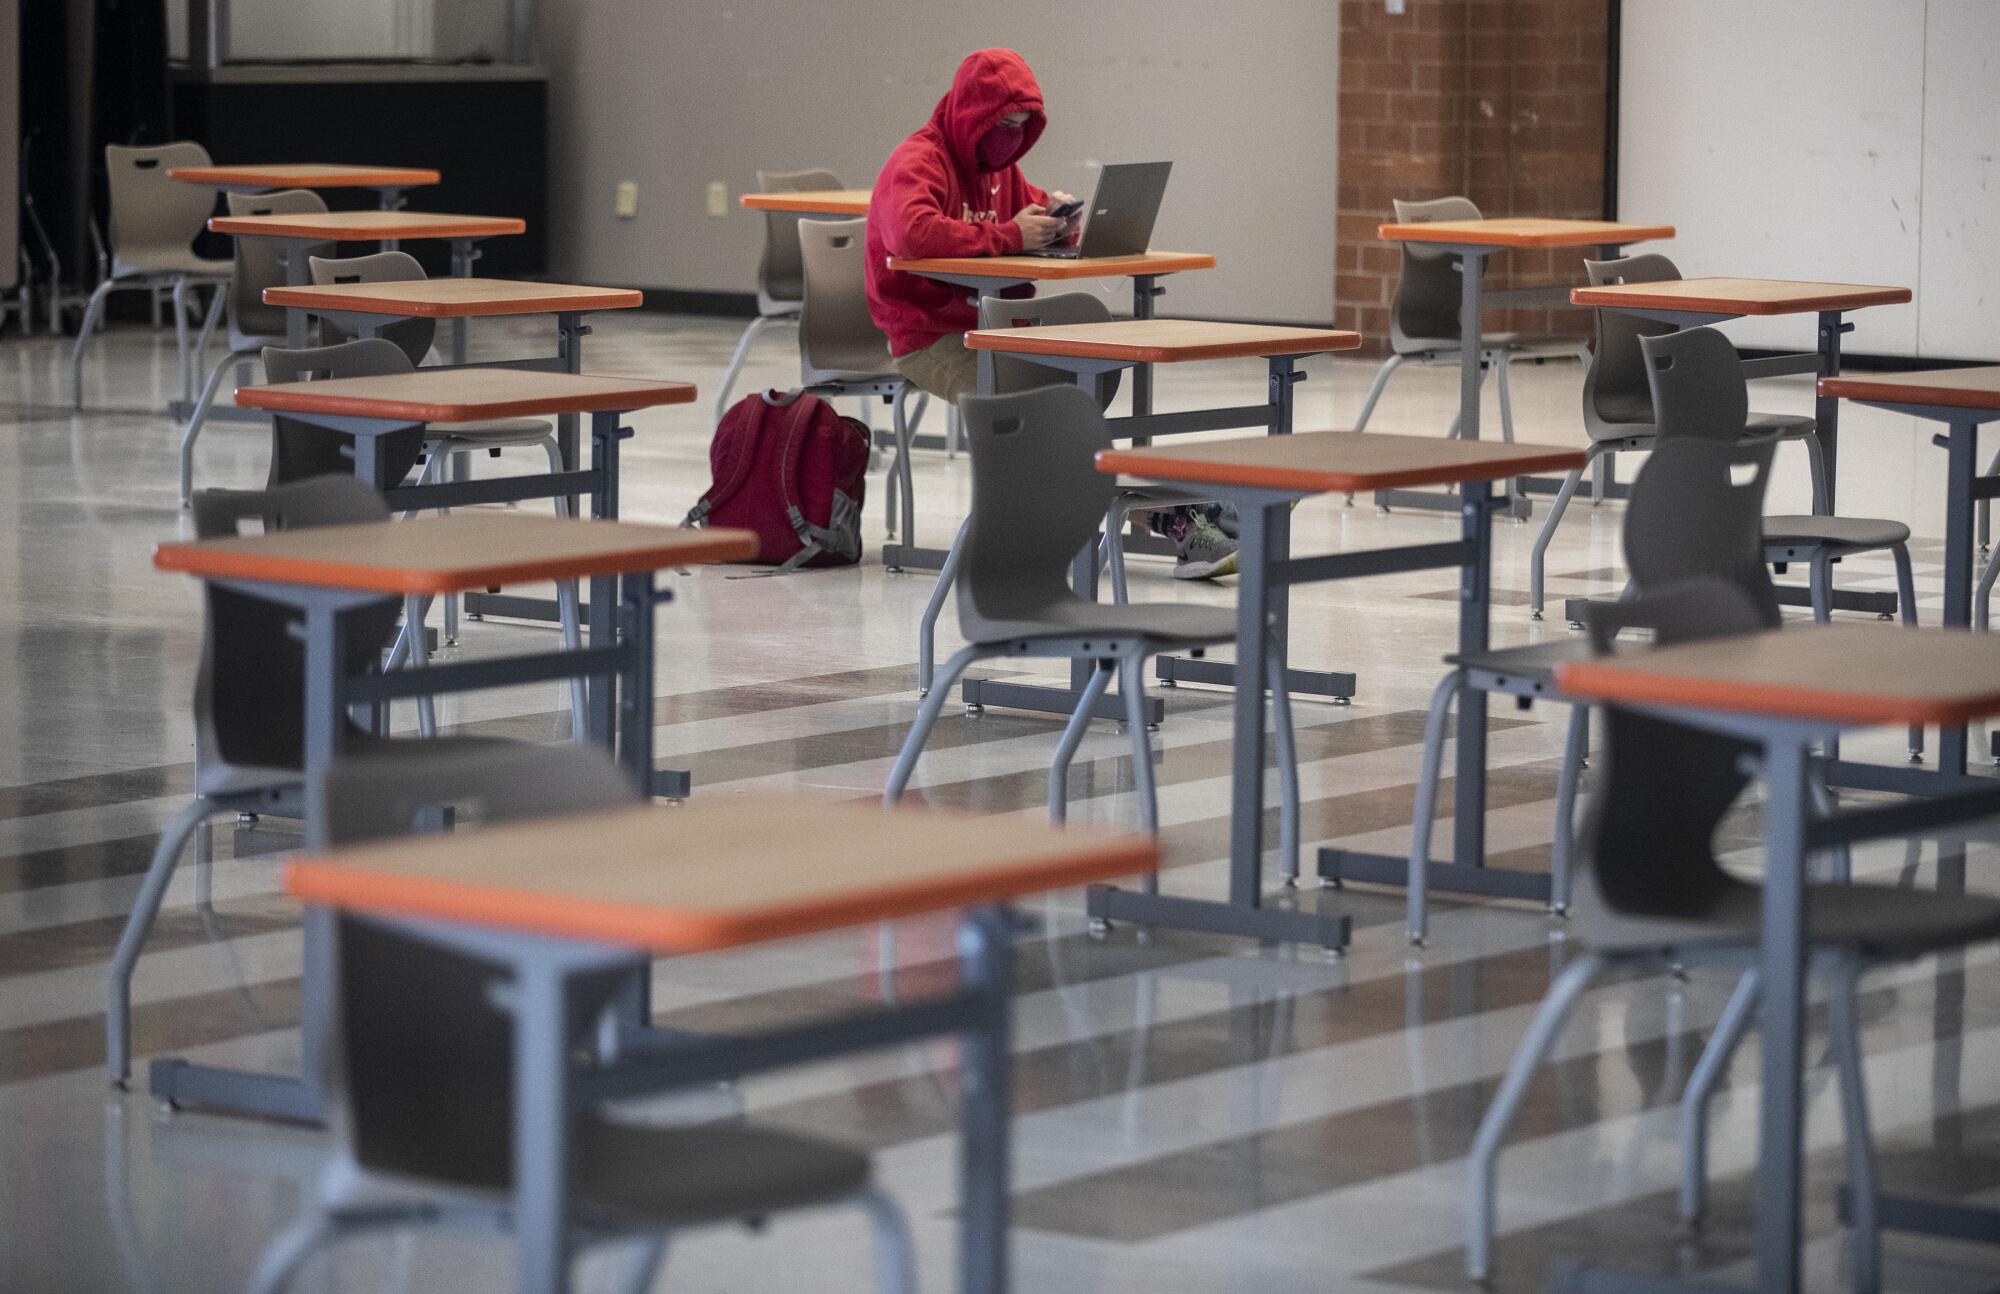 A lone student sitting at a desk in a group of spaced-out desks